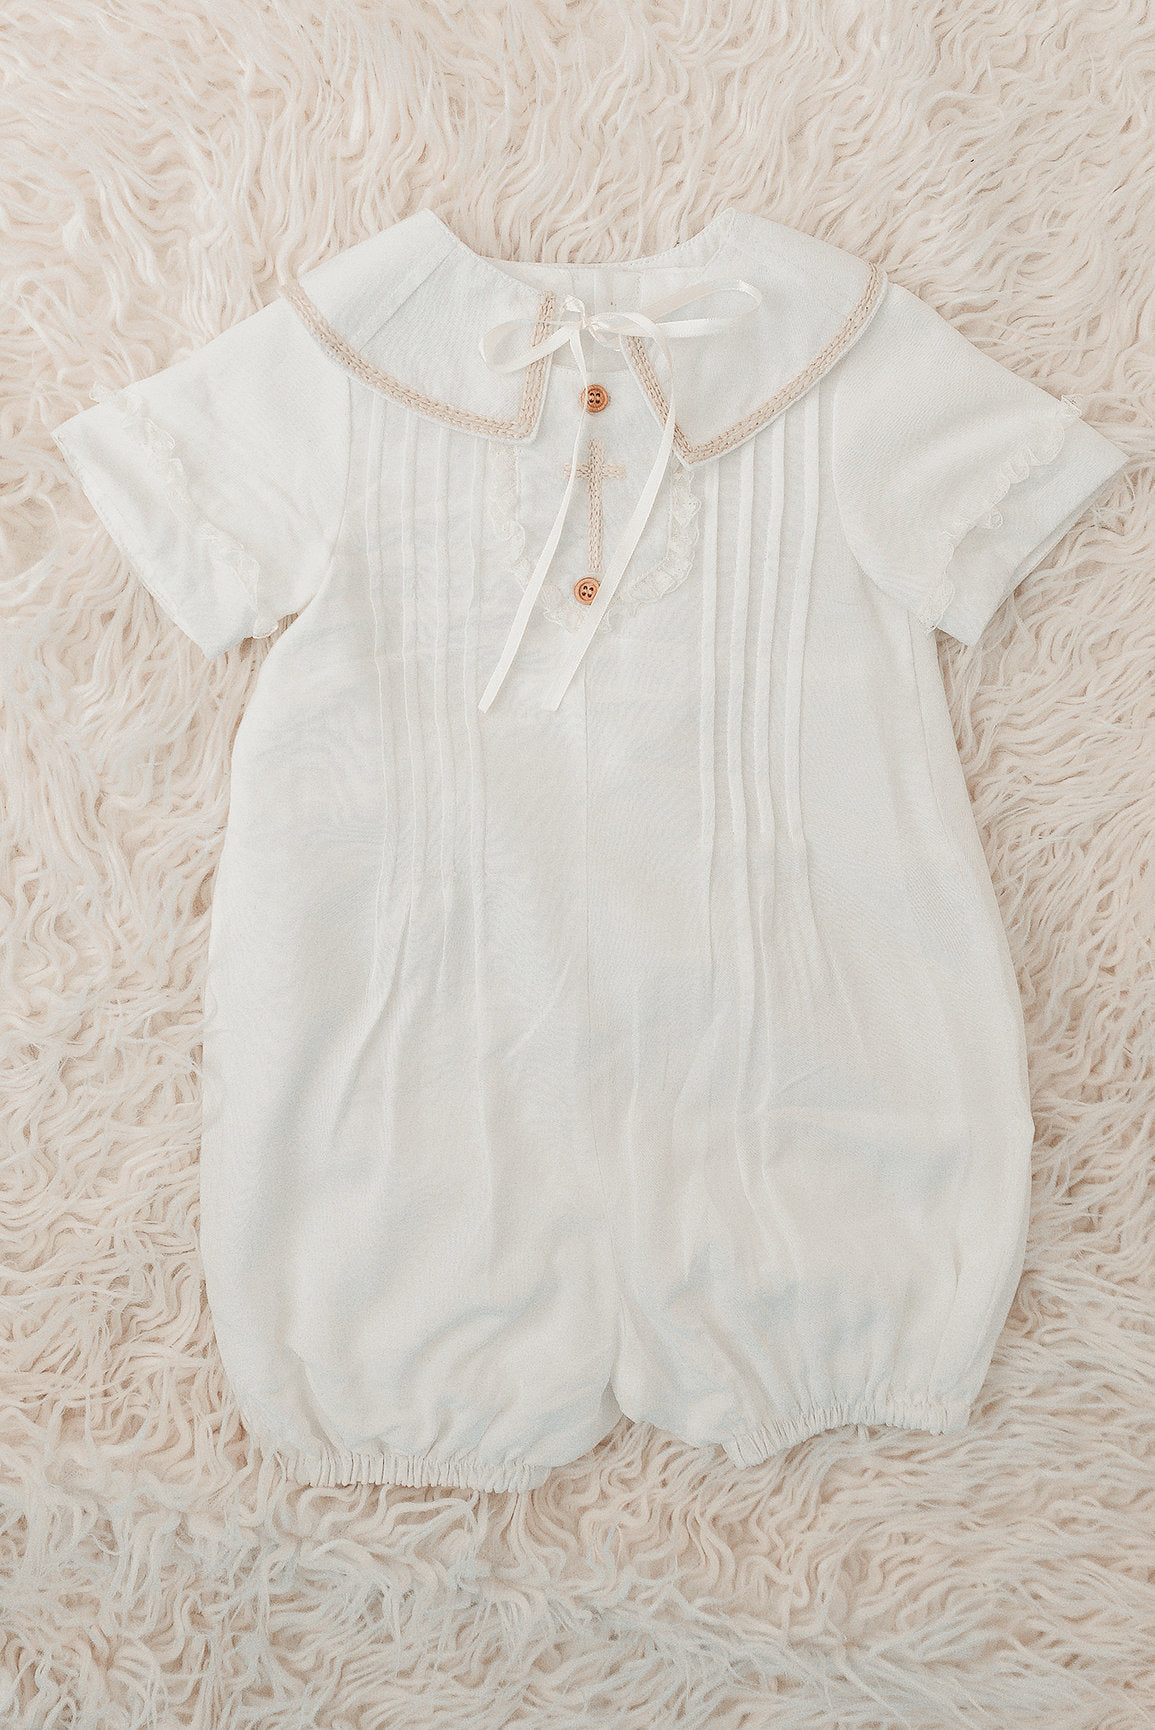 boys heirloom outfit romper